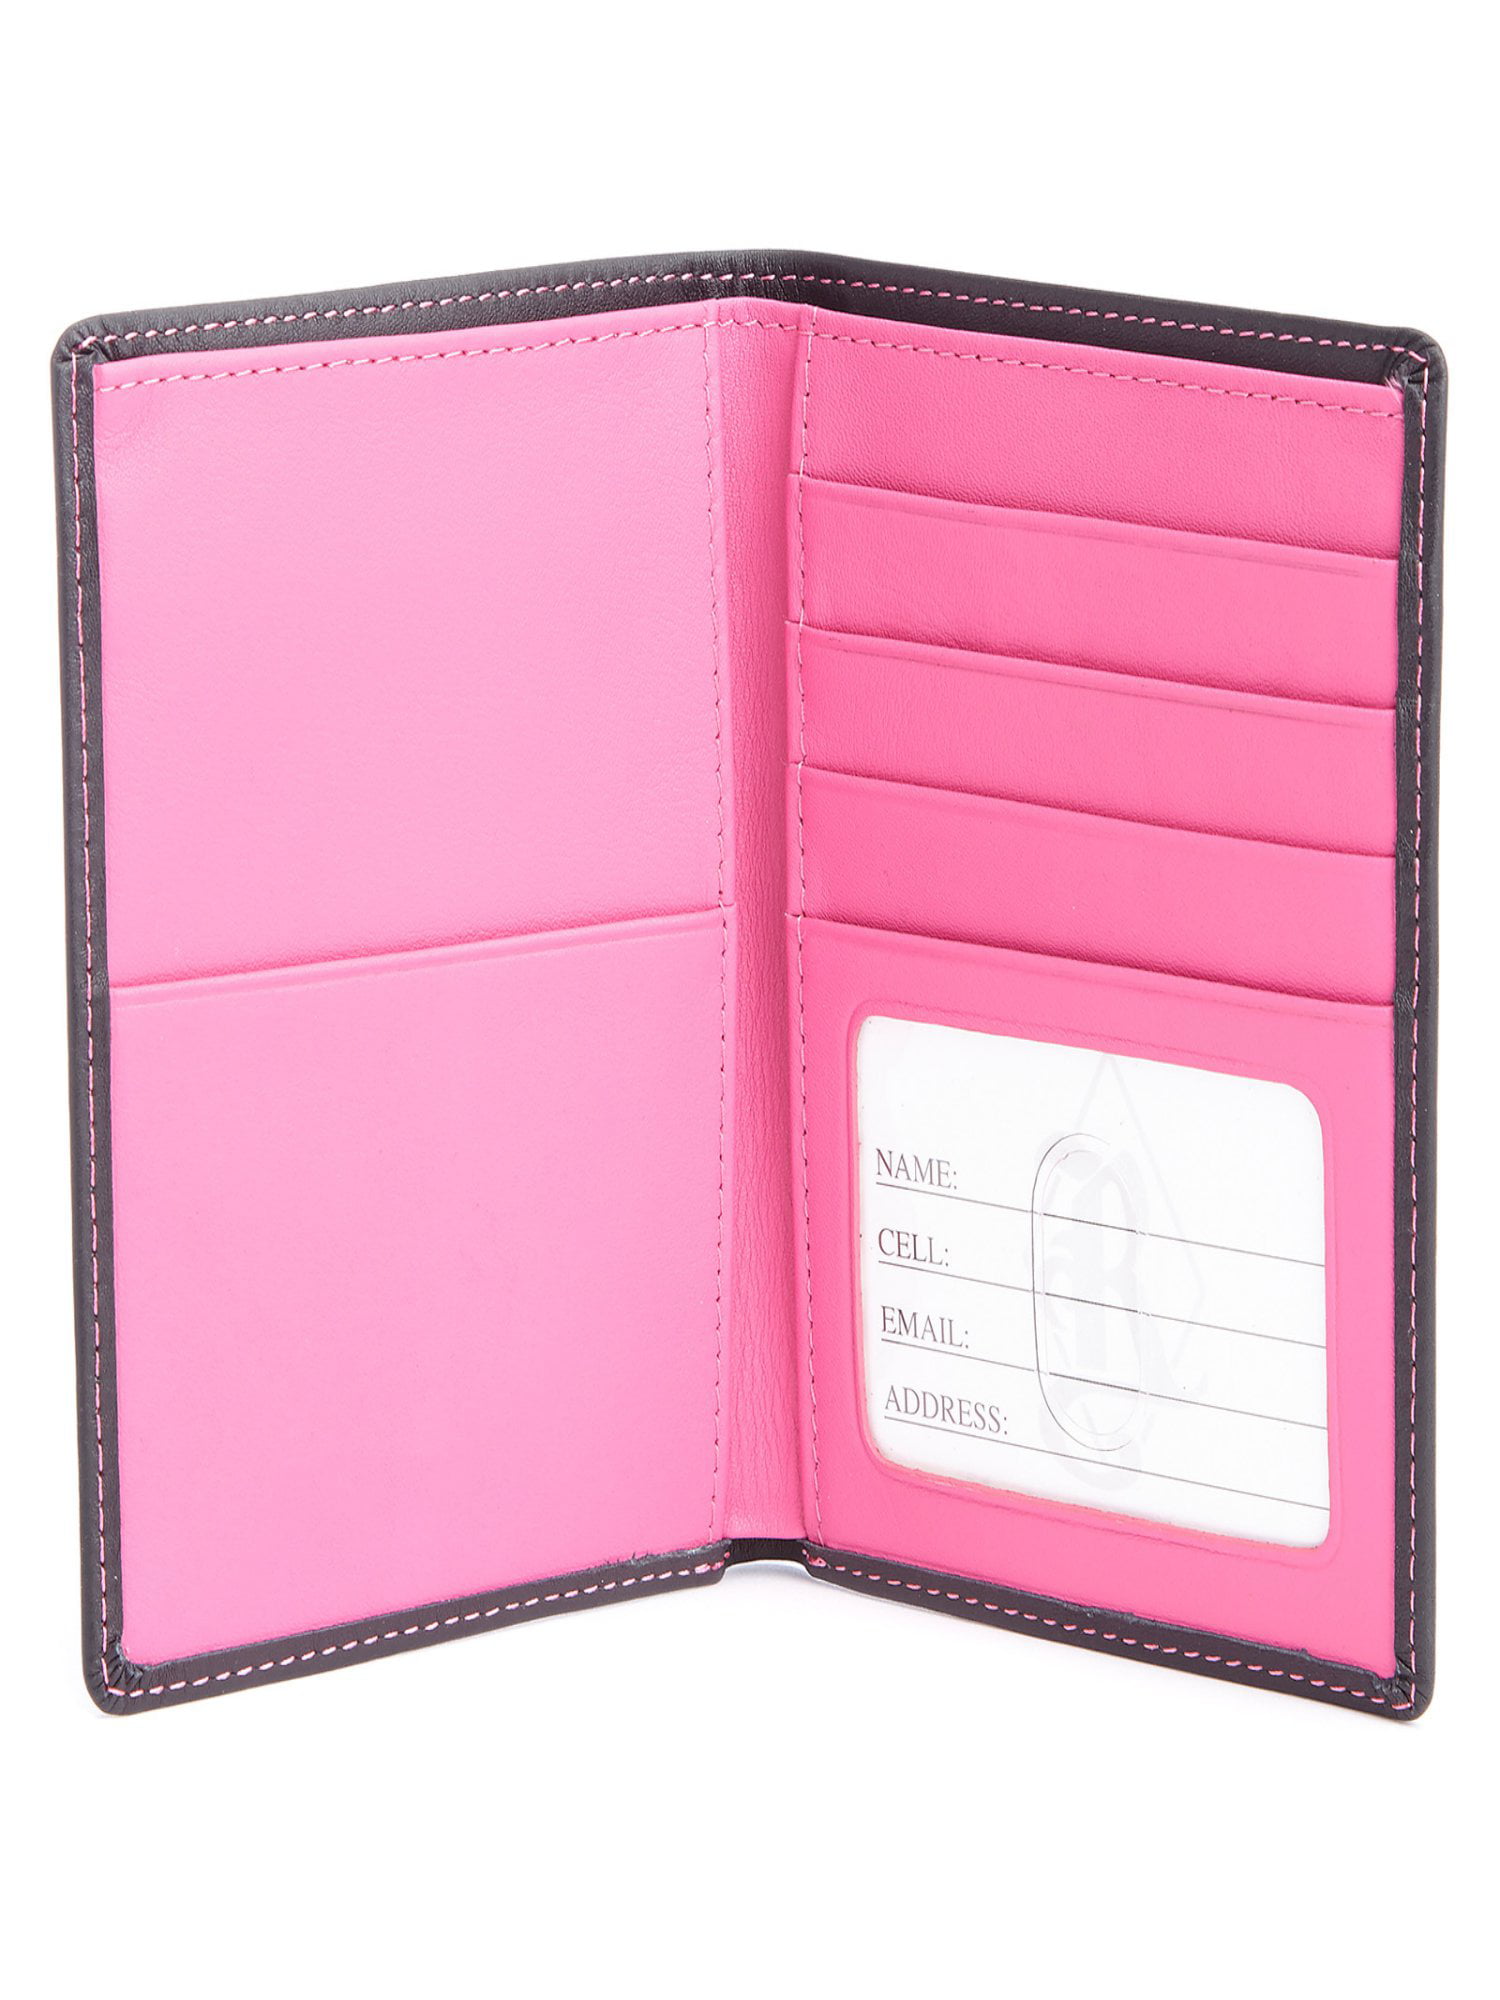 Royce Leather Womens RFID Blocking Slim City Wallet in Leather Pink 